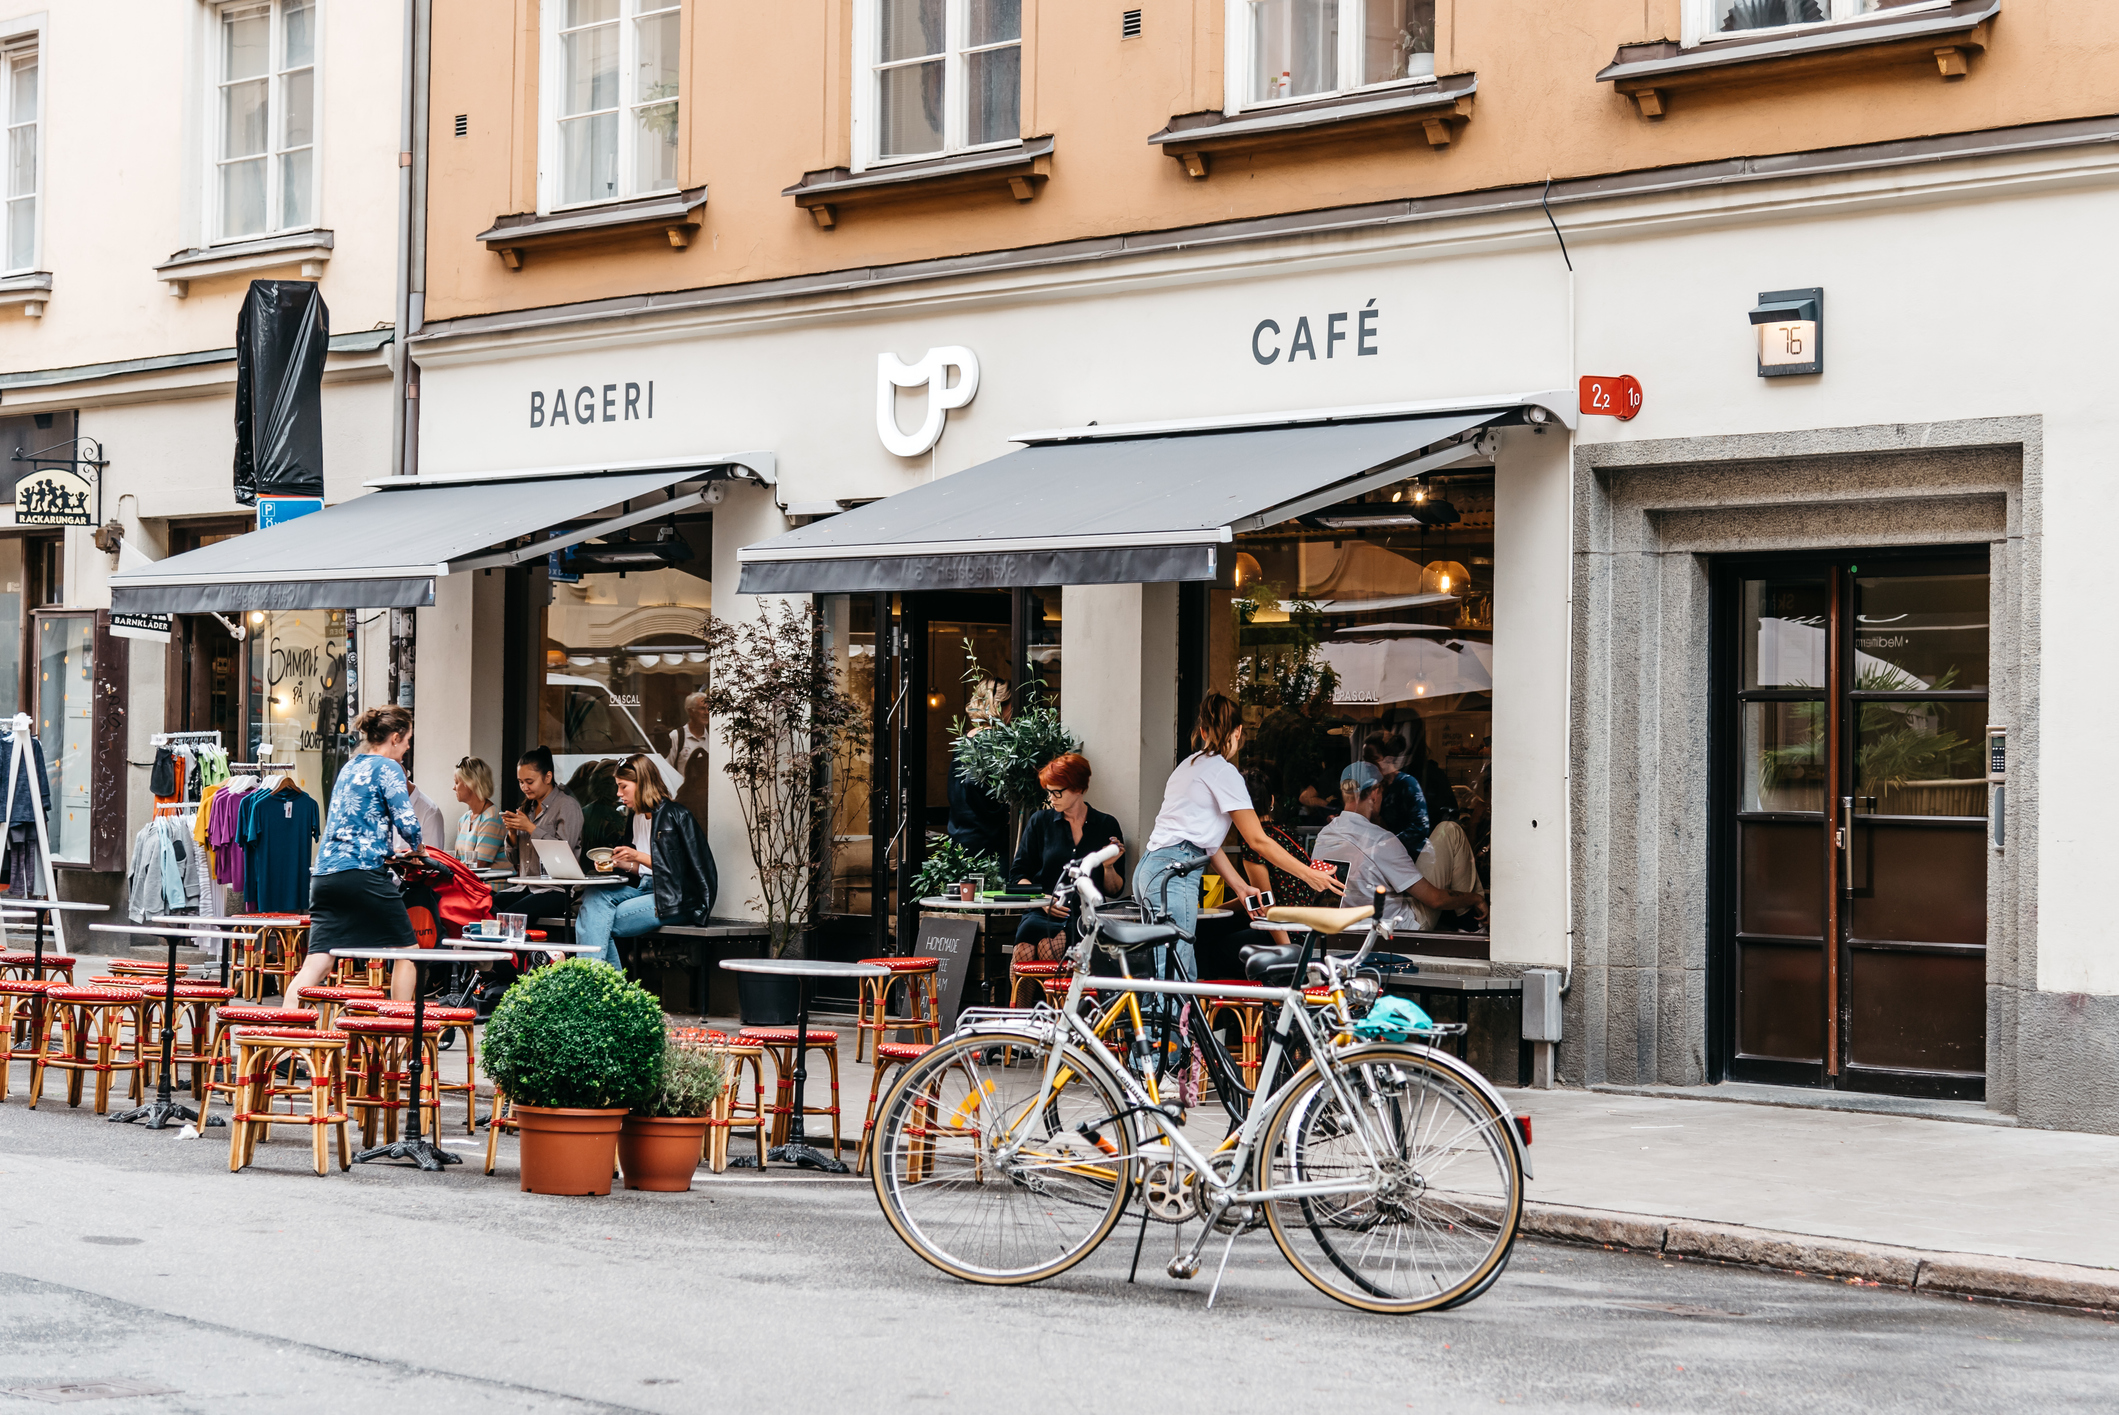 Stockholm, Sweden - August 8, 2019: Street scene in Sofo, the trendiest neighbourhood in Stockholm, known for its hipster cafes and cool shops.